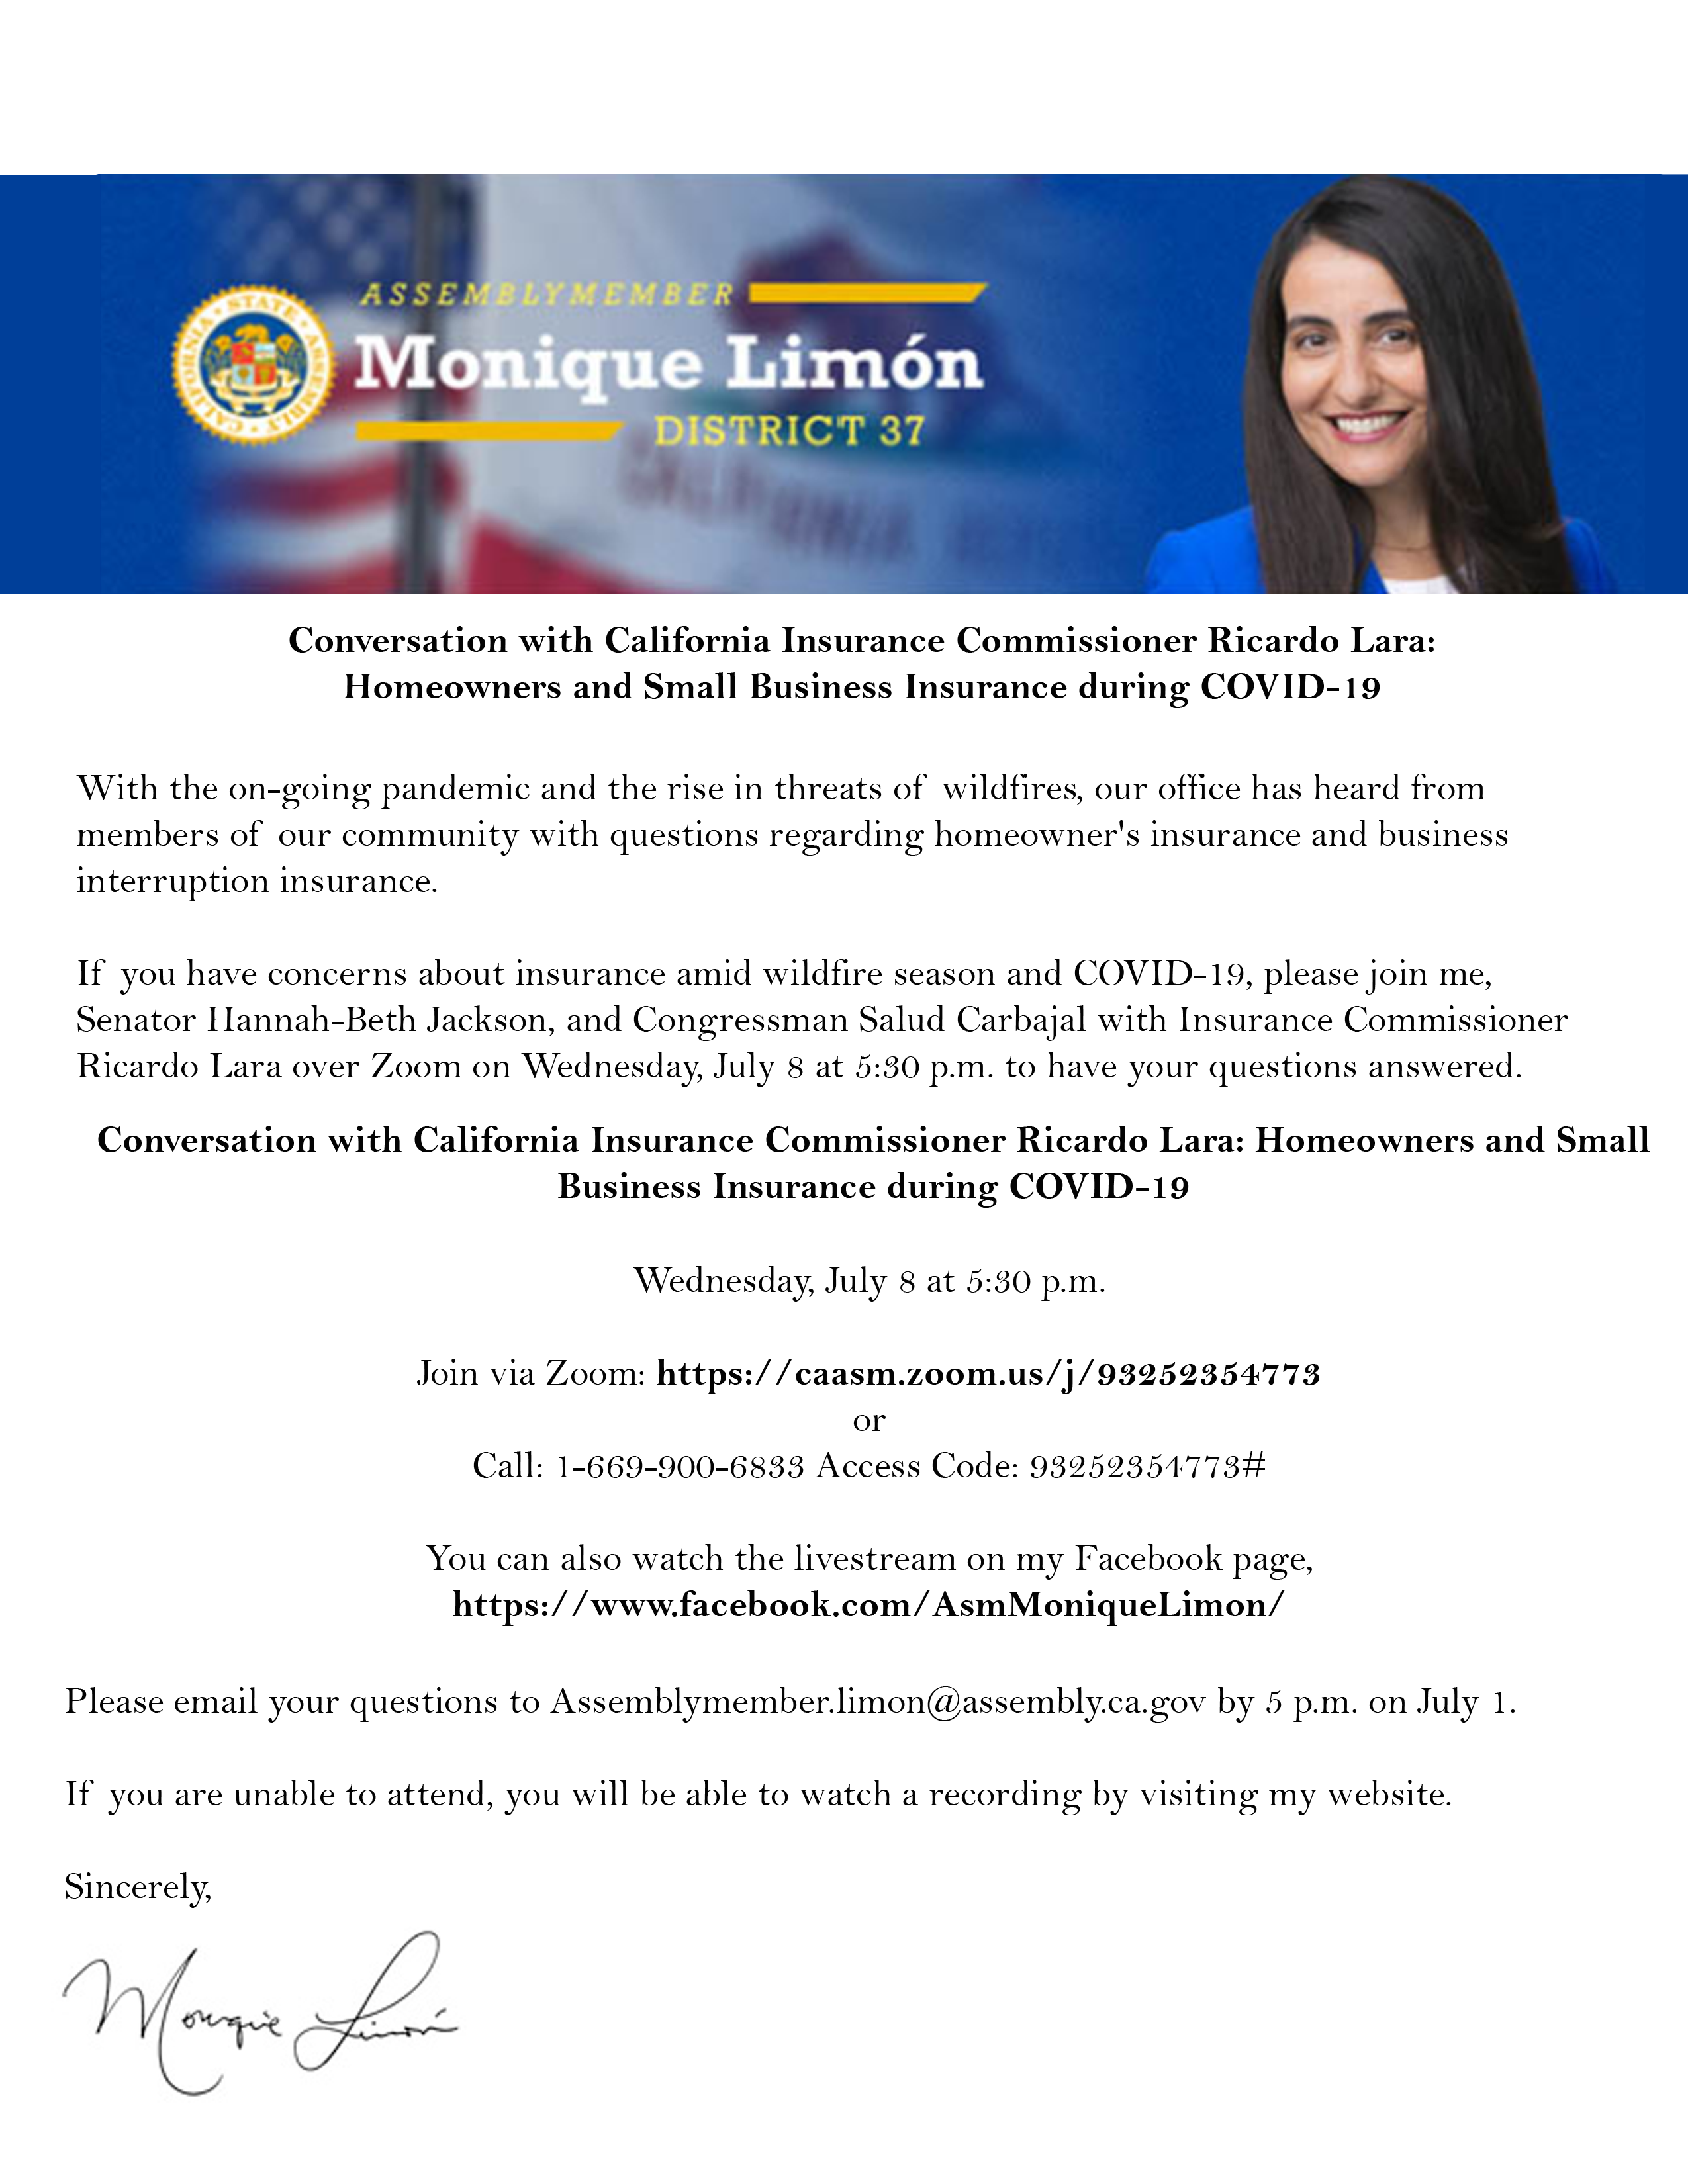 please join me, Senator Hannah-Beth Jackson, and Congressman Salud Carbajal with Insurance Commissioner Ricardo Lara over Zoom on Wednesday, July 8 at 5:30 p.m. to have your questions answered. Conversation with California Insurance Commissioner Ricardo L